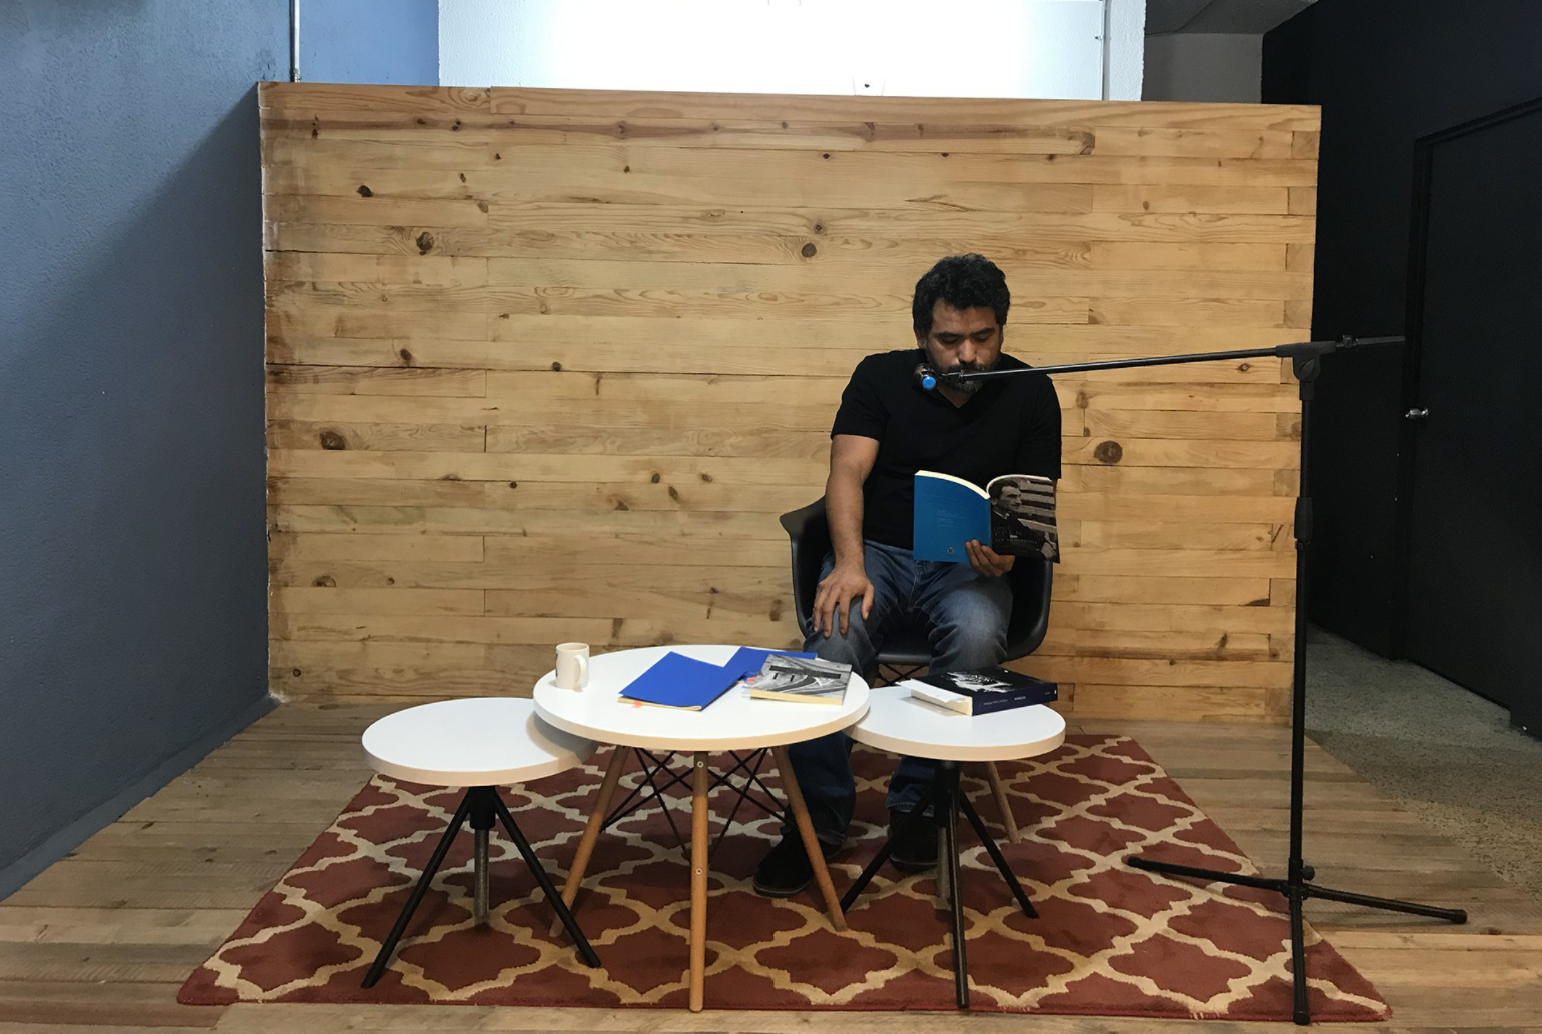 This is a picture of HUGO GARCÍA MANRÍQUEZ sitting in front of a microphone and reading from his book.